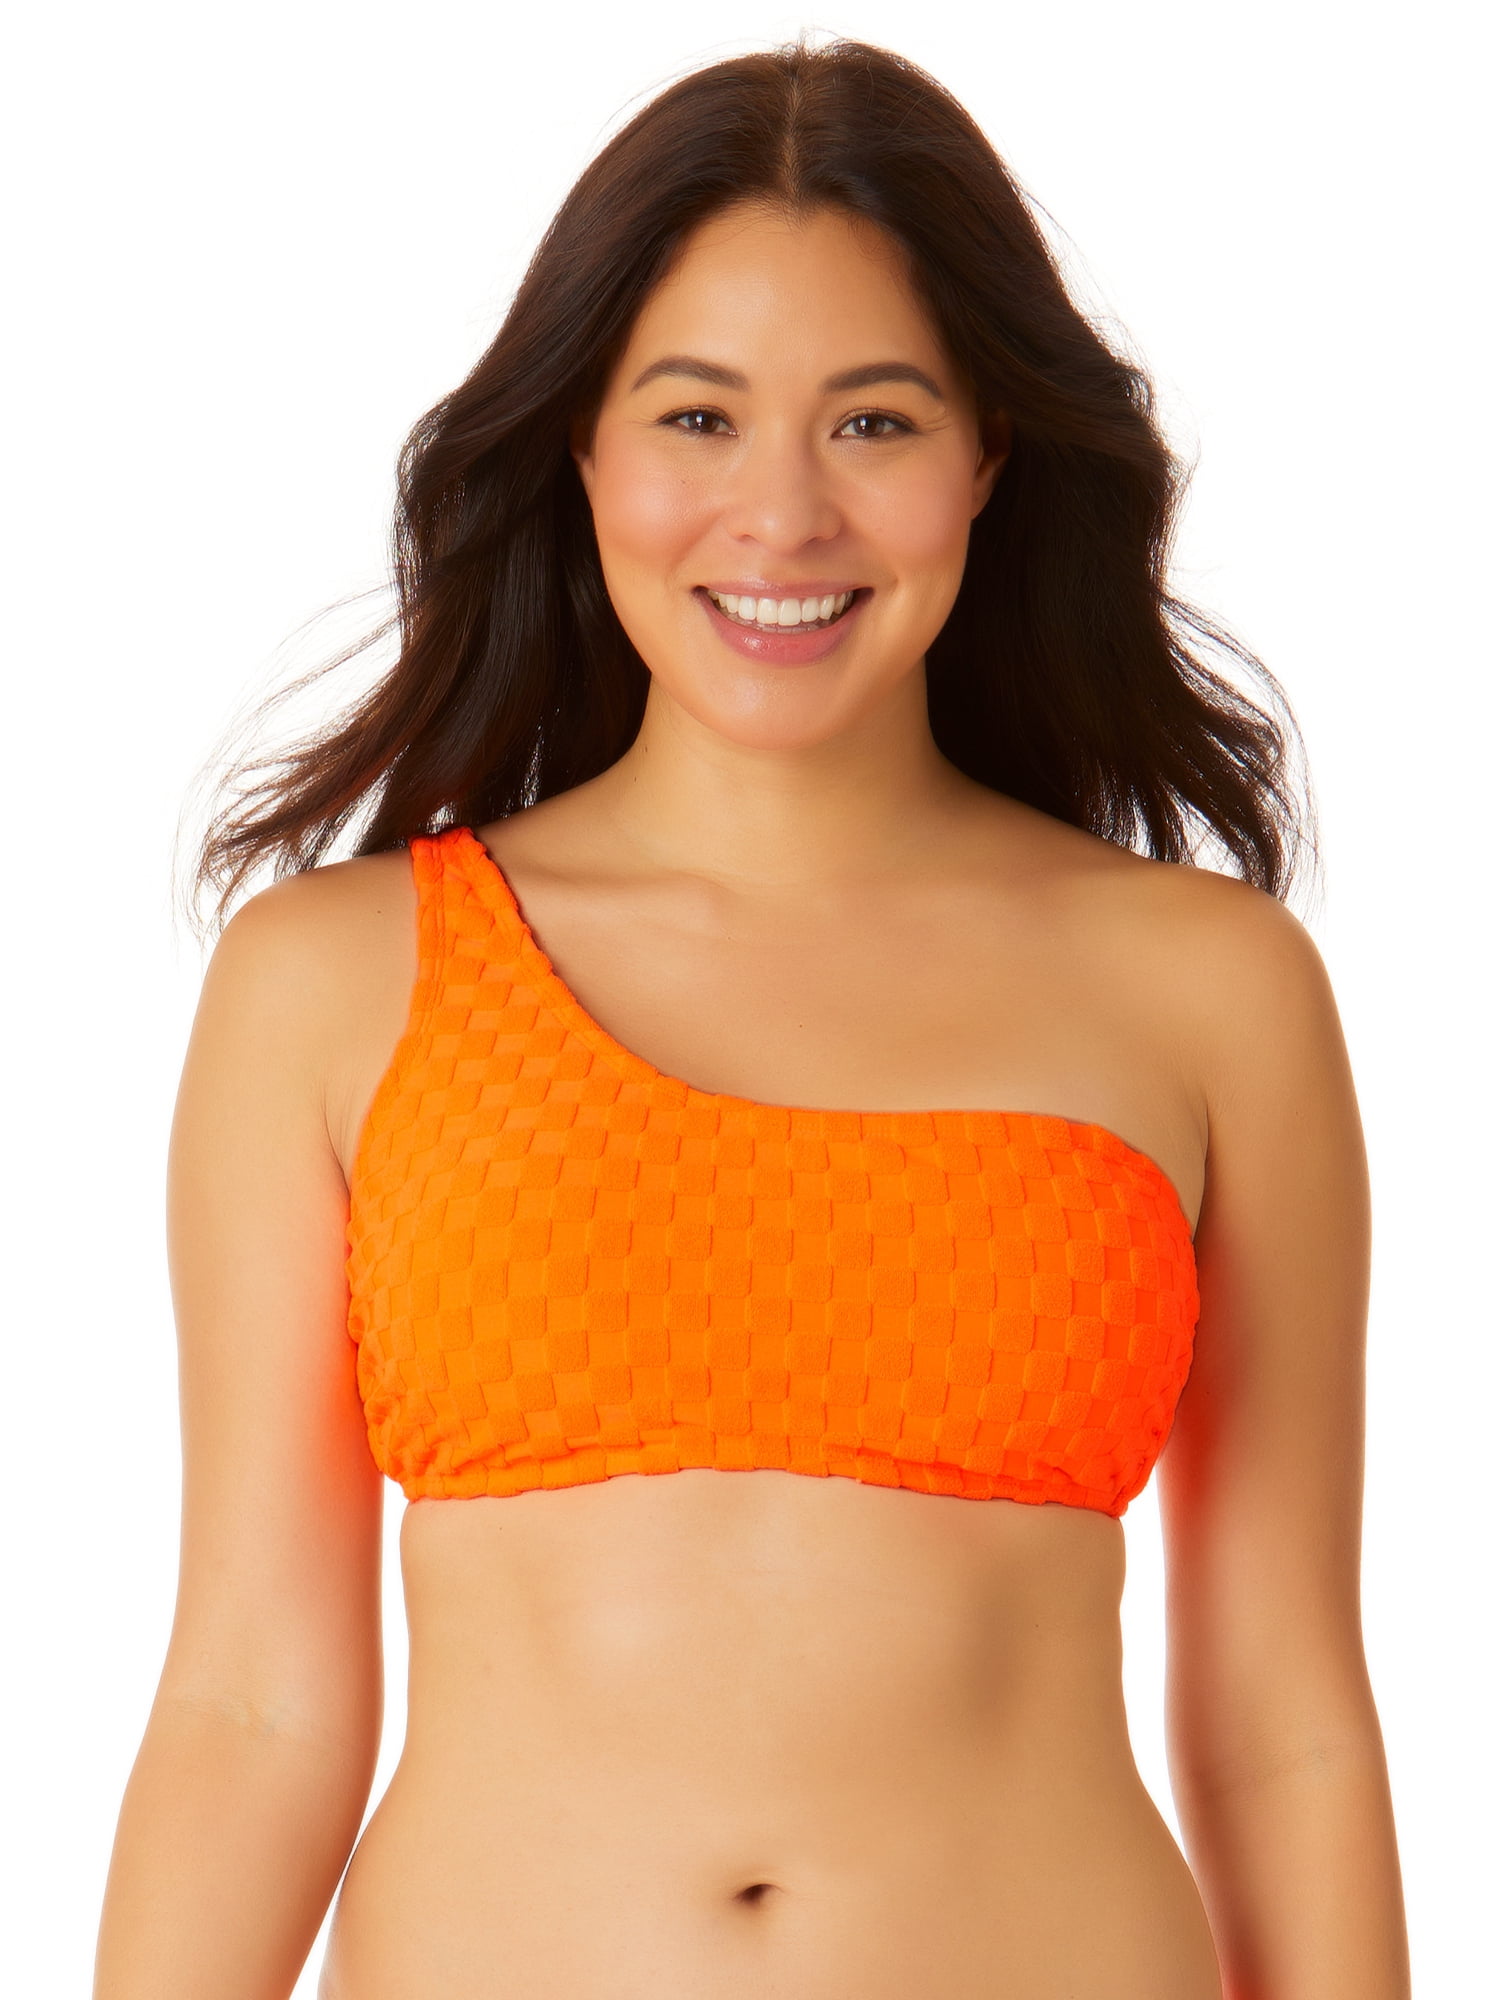 Suma-Ma Rainbow Bikini Set, 15 Flattering Swimsuits For Girls With Small  Busts — All Under $20 on